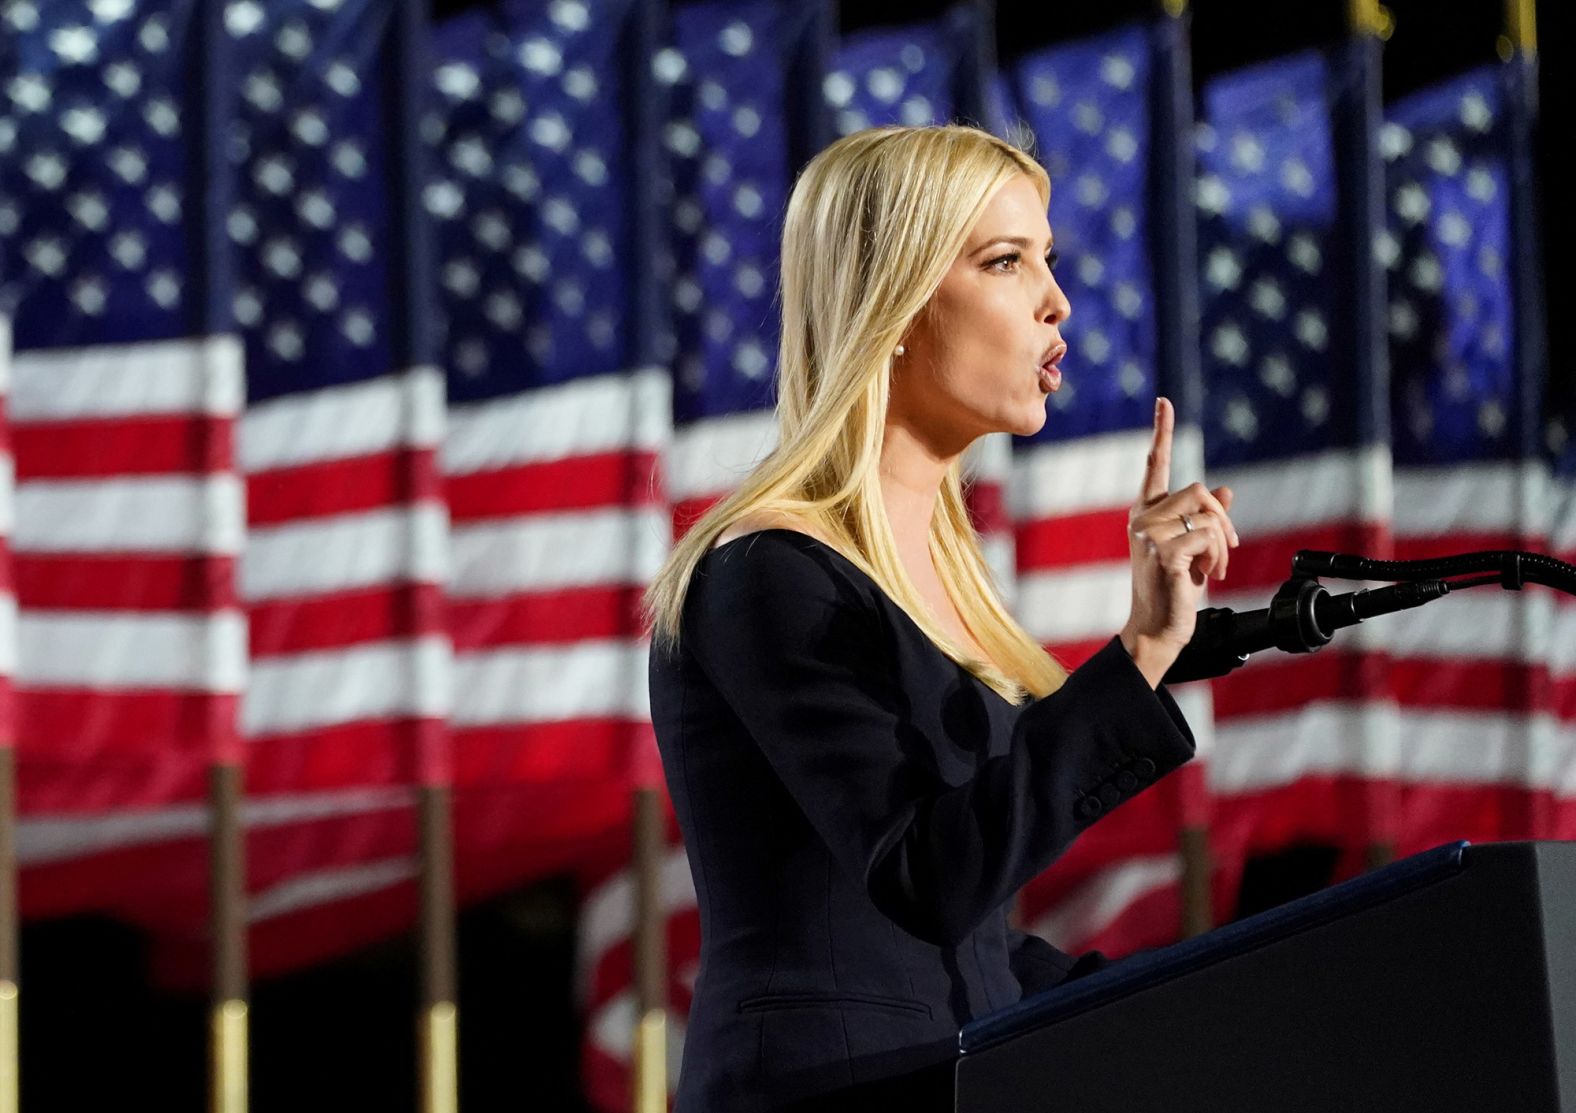 Ivanka Trump, a White House senior adviser, introduced her father for his speech on Thursday. She described him as "the people's President," a "champion of the American worker" and the voice for the "forgotten men and women of this country."